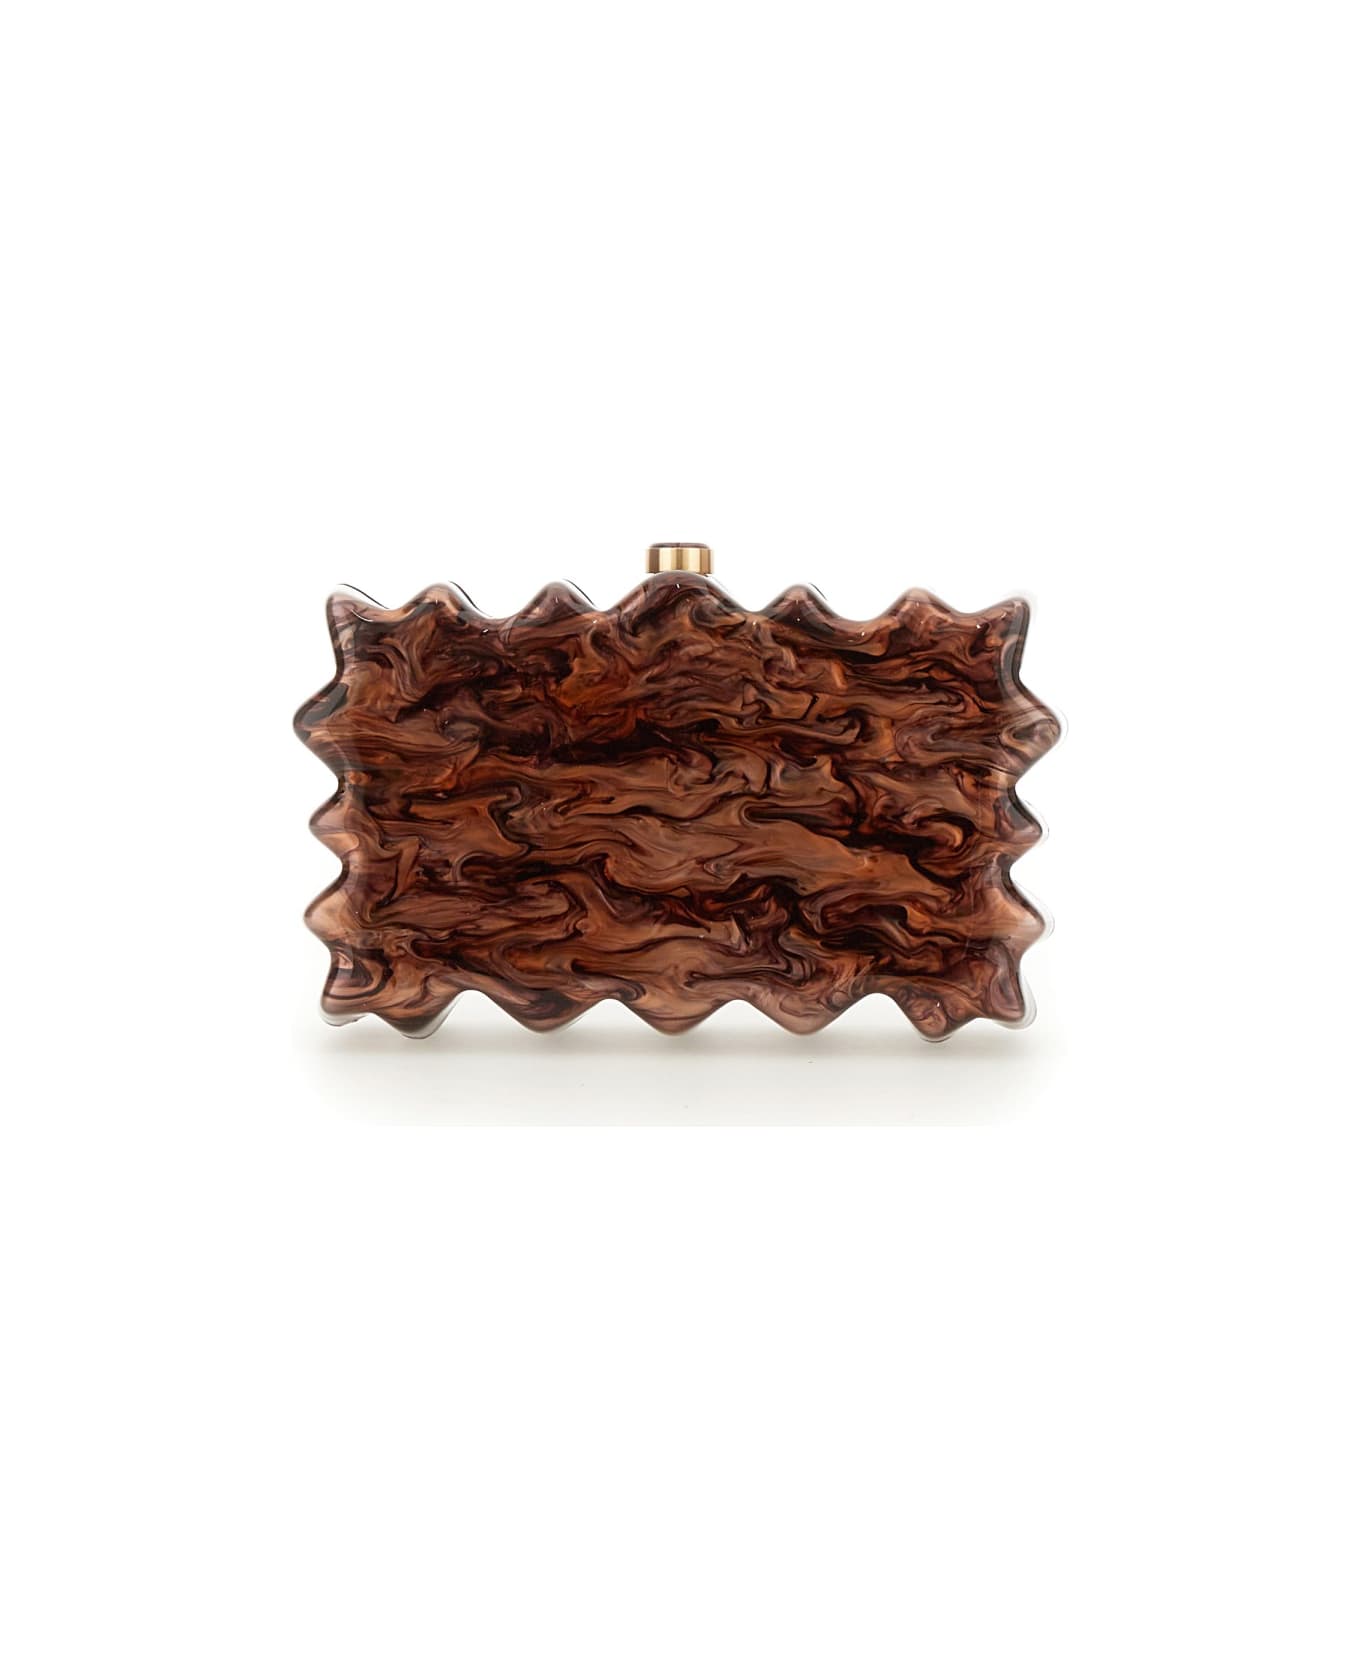 Cult Gaia Clutch "paloma" - BROWN クラッチバッグ